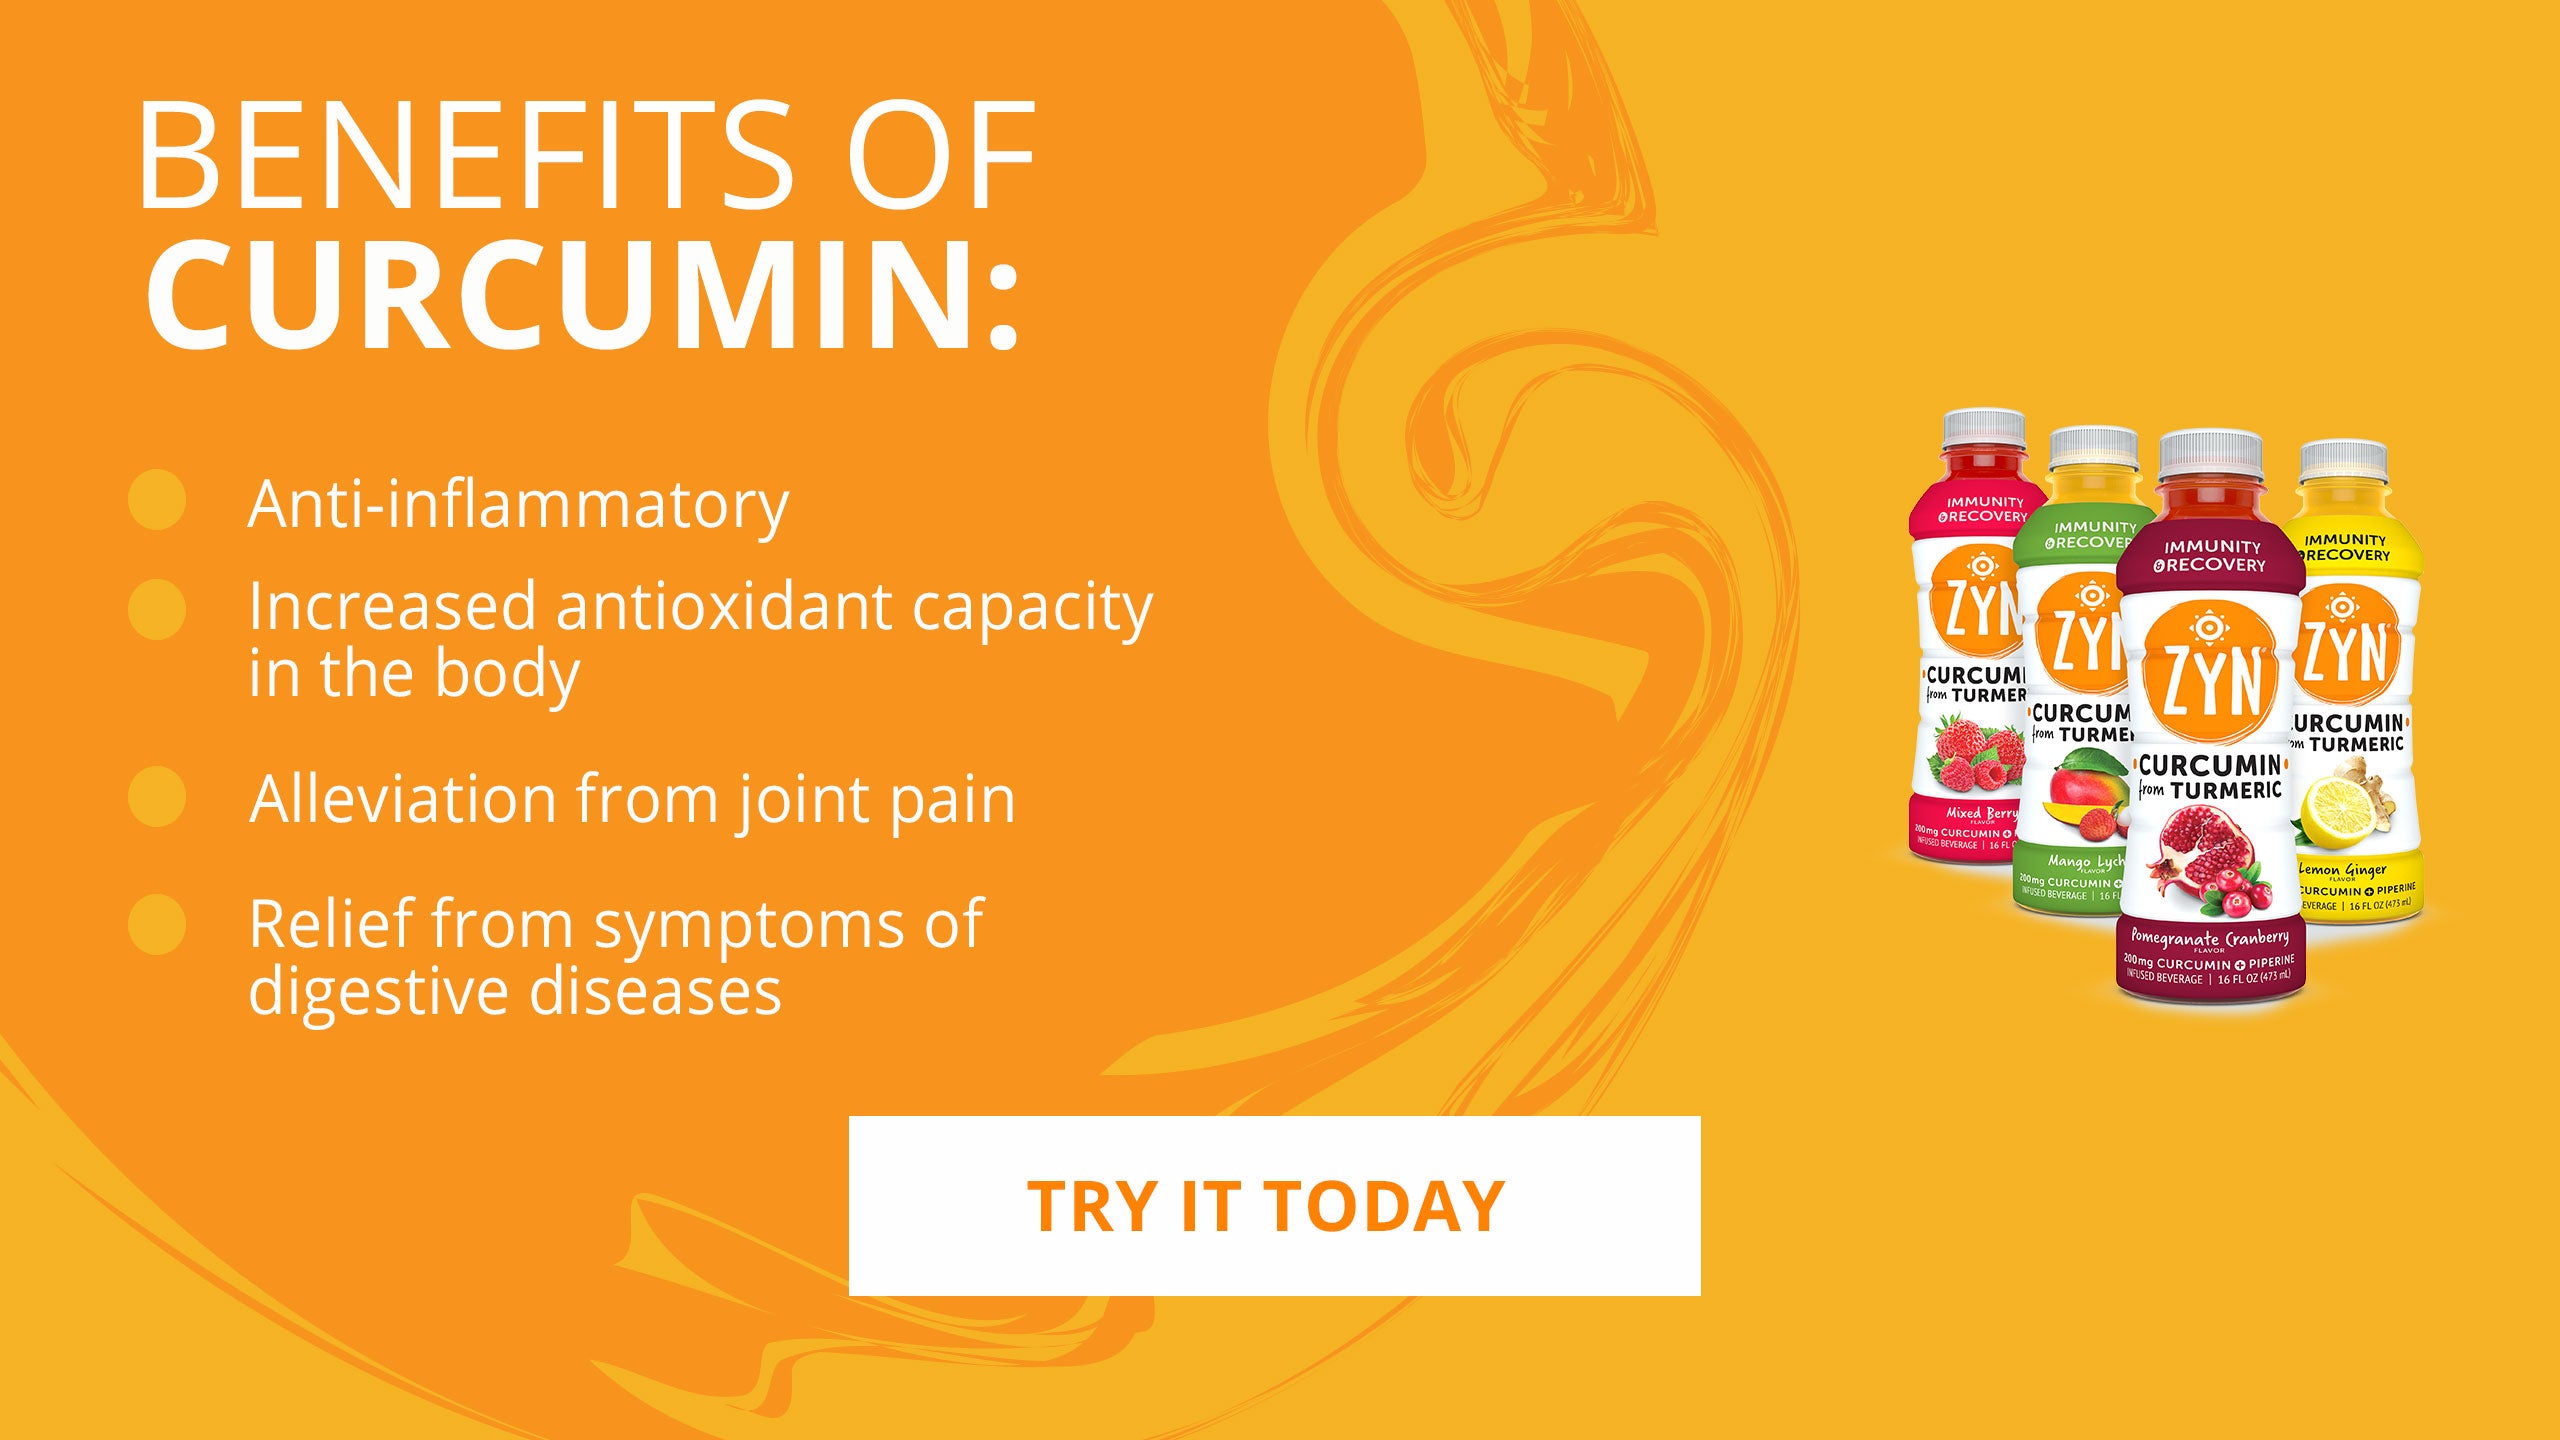 Are Curcumin And Turmeric The Same Thing Drink Zyn